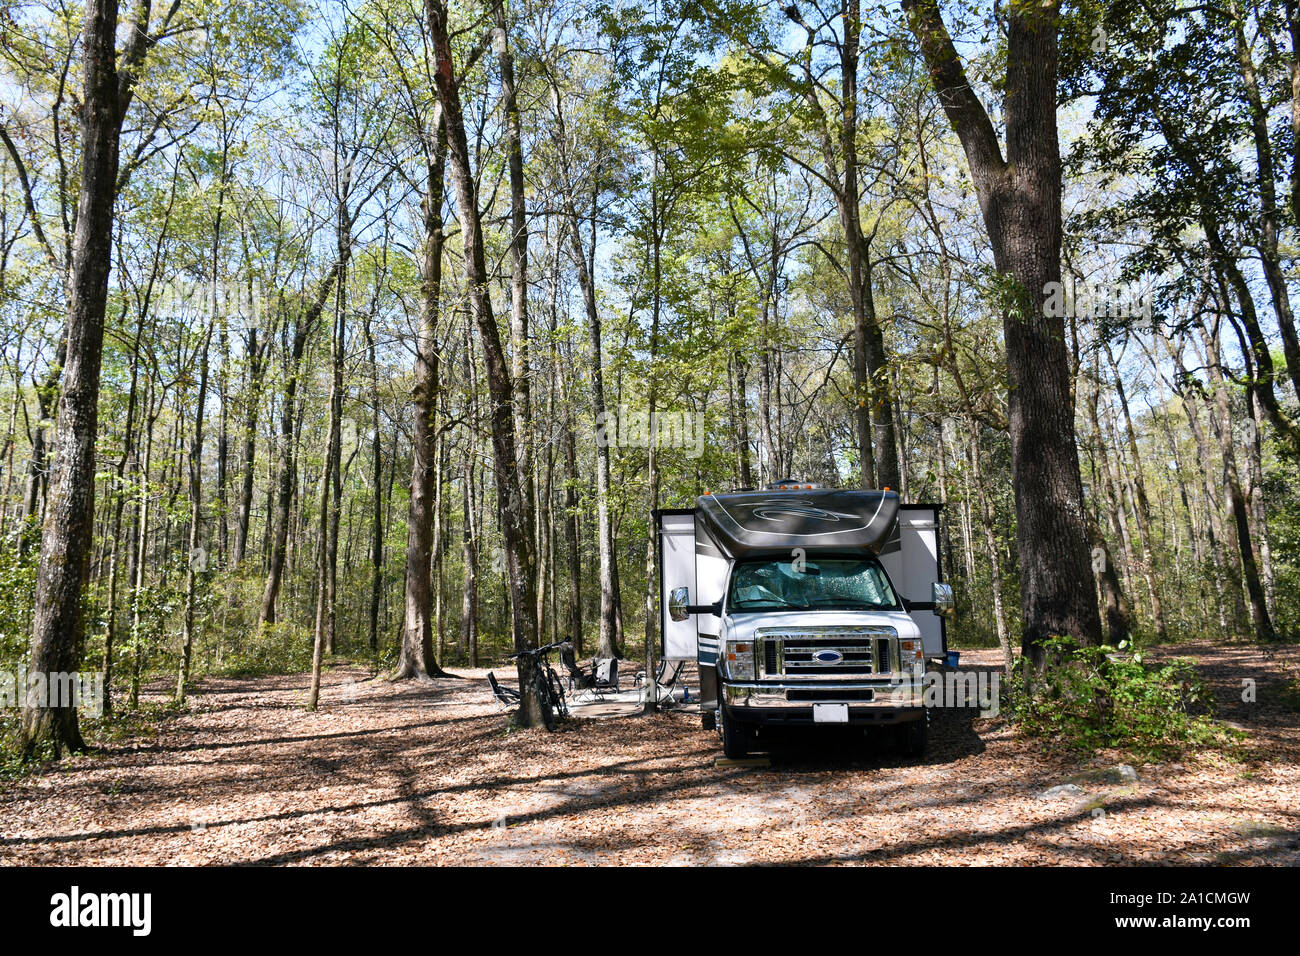 A large Class C RV caravan with slides is seen at the campground at Ichetucknee Springs State Park in Florida, a beautiful area off the beaten path. Stock Photo